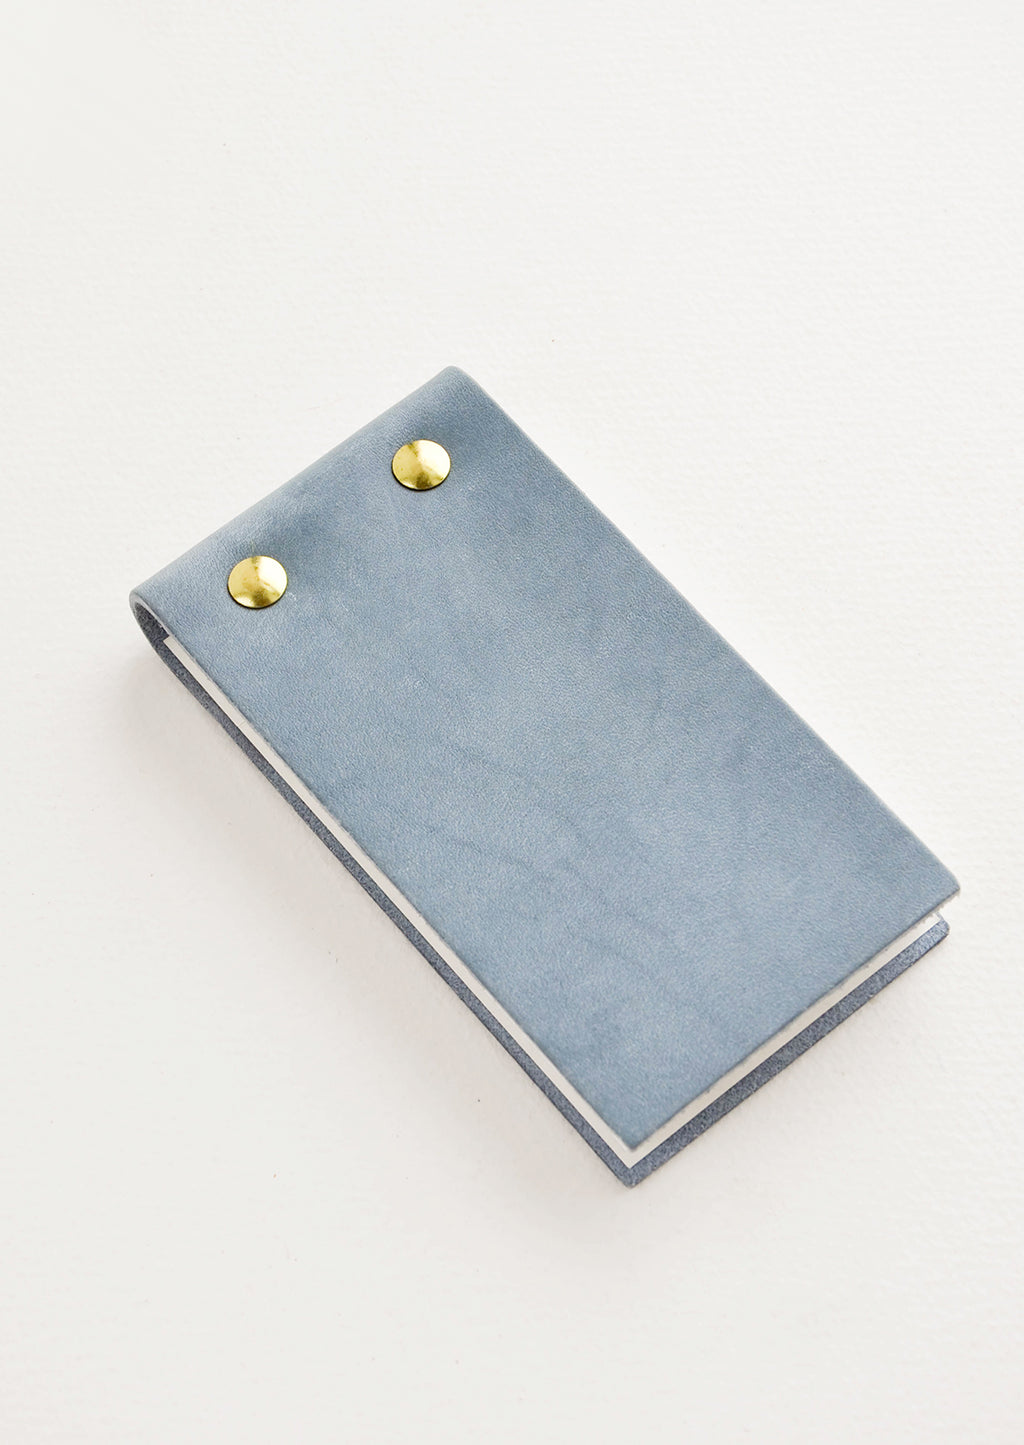 Dusty Blue: Small blue leather notepad with brass grommets.